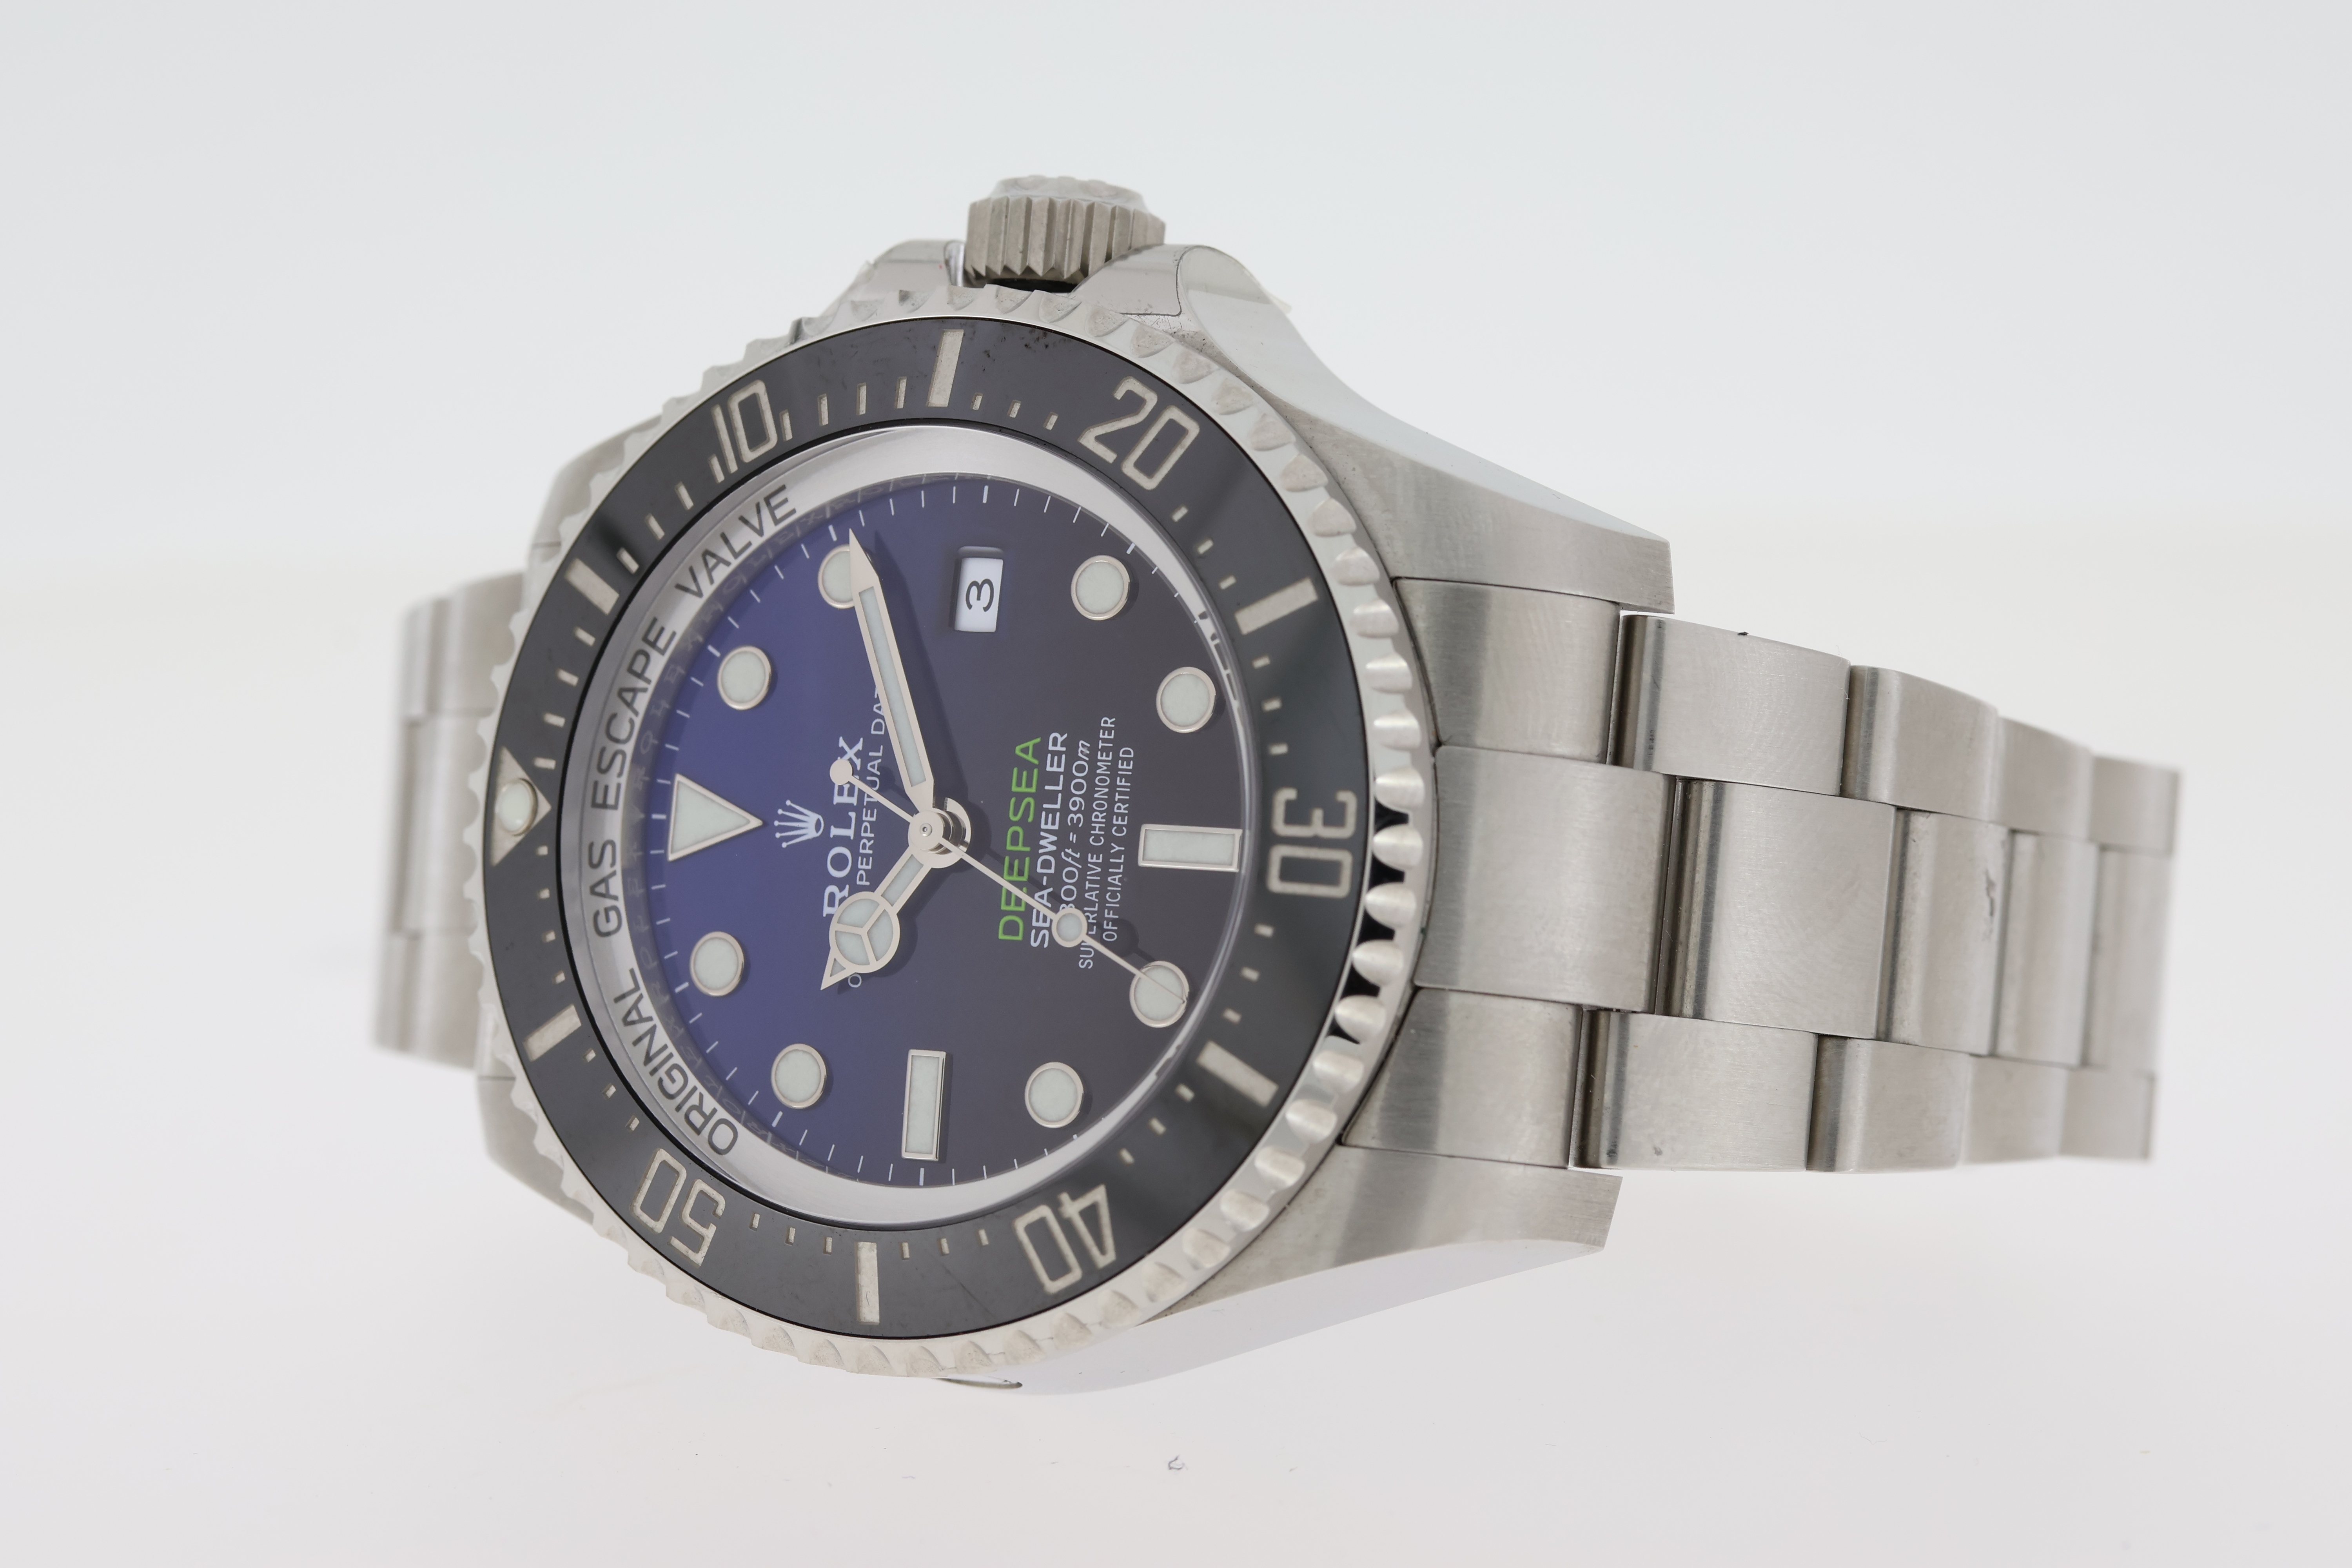 ROLEX SEA DWELLER DEEPSEA 'JAMES CAMERON' REFERENCE 126660 WITH PAPERS 2022 - Image 2 of 6